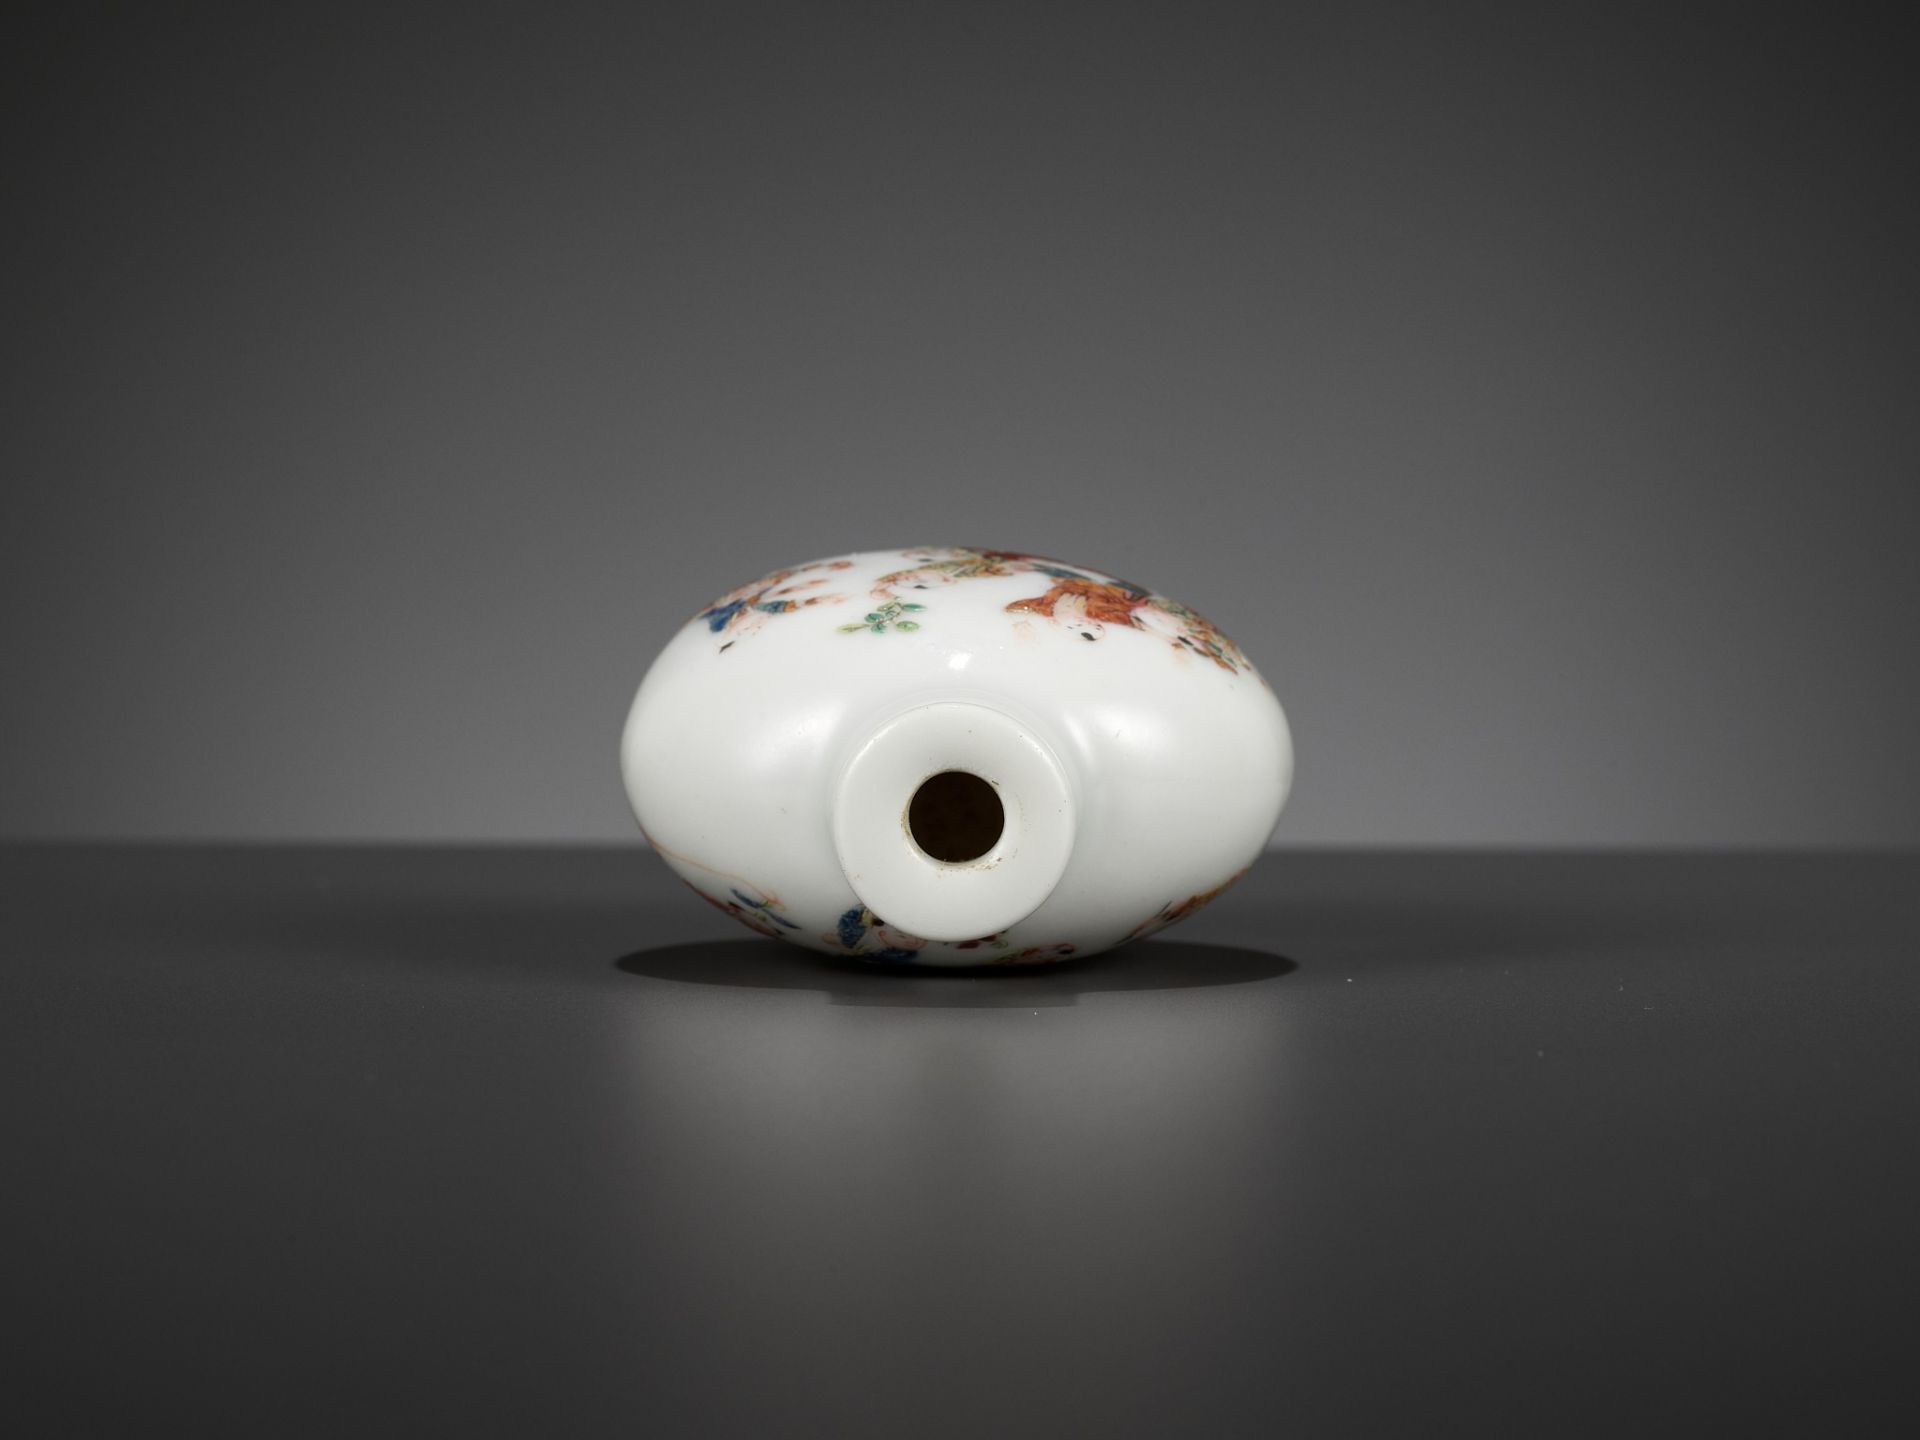 AN IMPERIAL FAMILLE ROSE 'BOYS AT PLAY' PORCELAIN SNUFF BOTTLE, DAOGUANG MARK AND PERIOD - Image 8 of 11